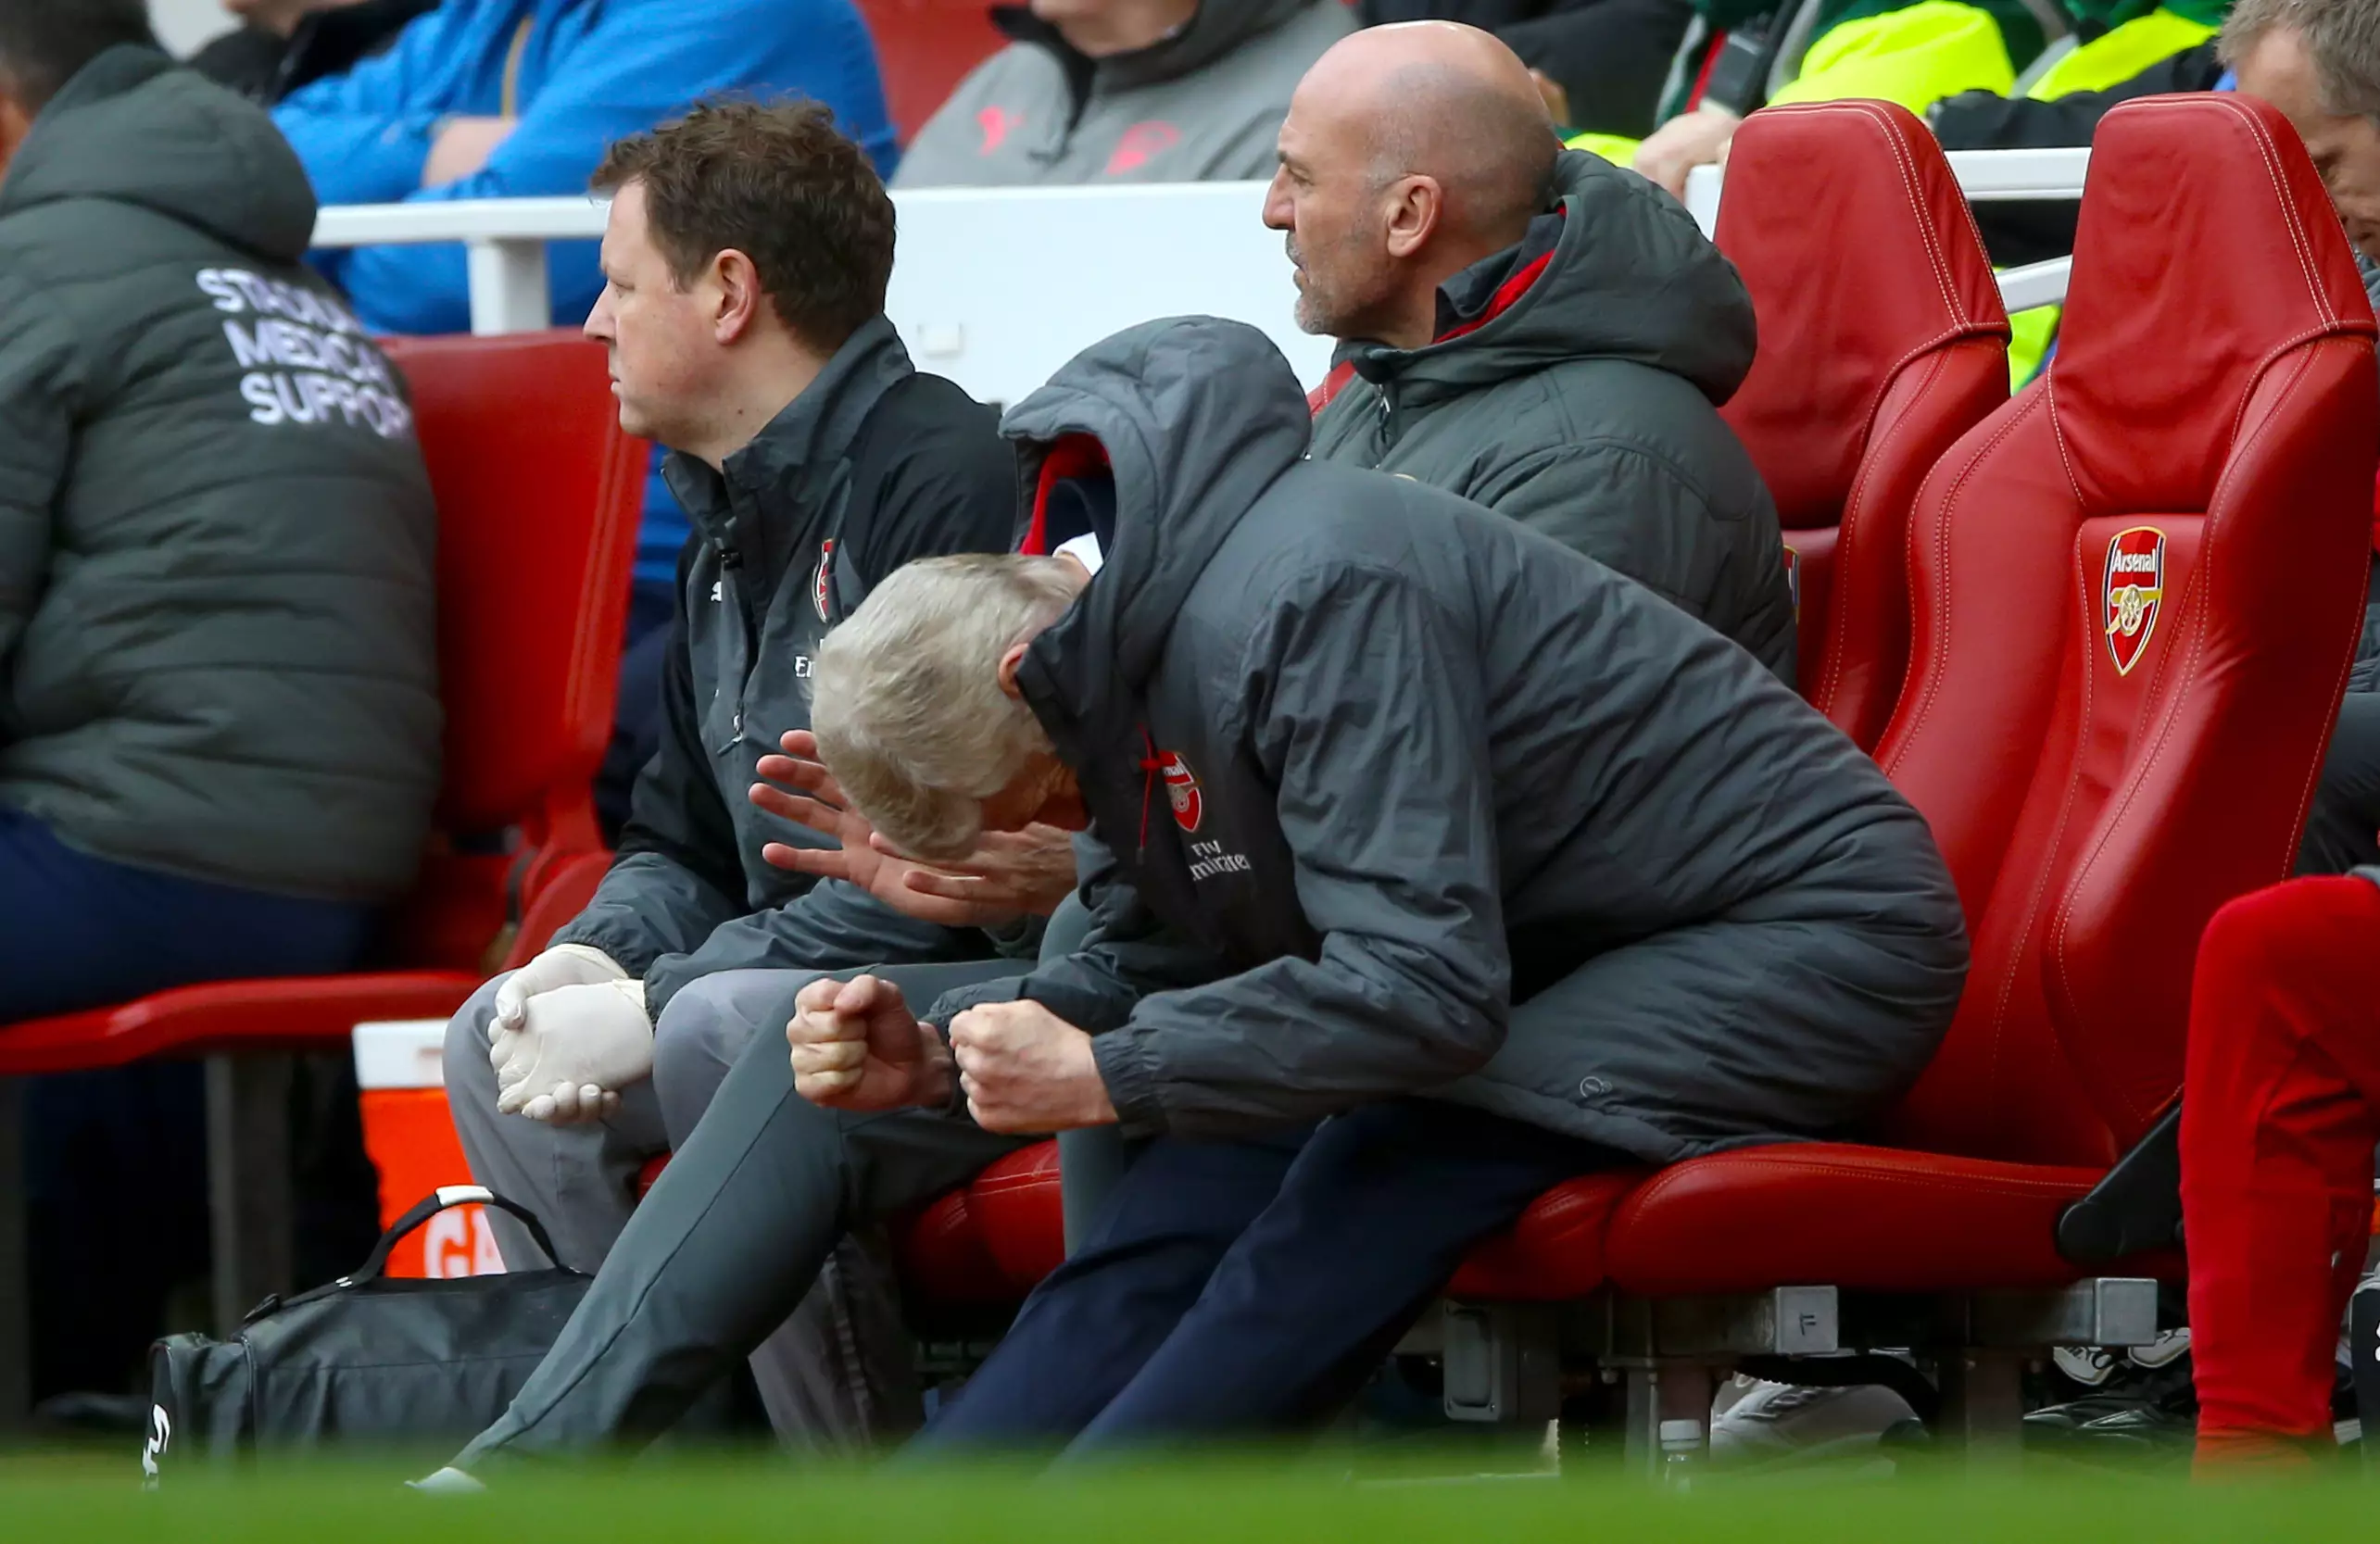 Wenger actually gets a chance to celebrate for once. Image: PA Images